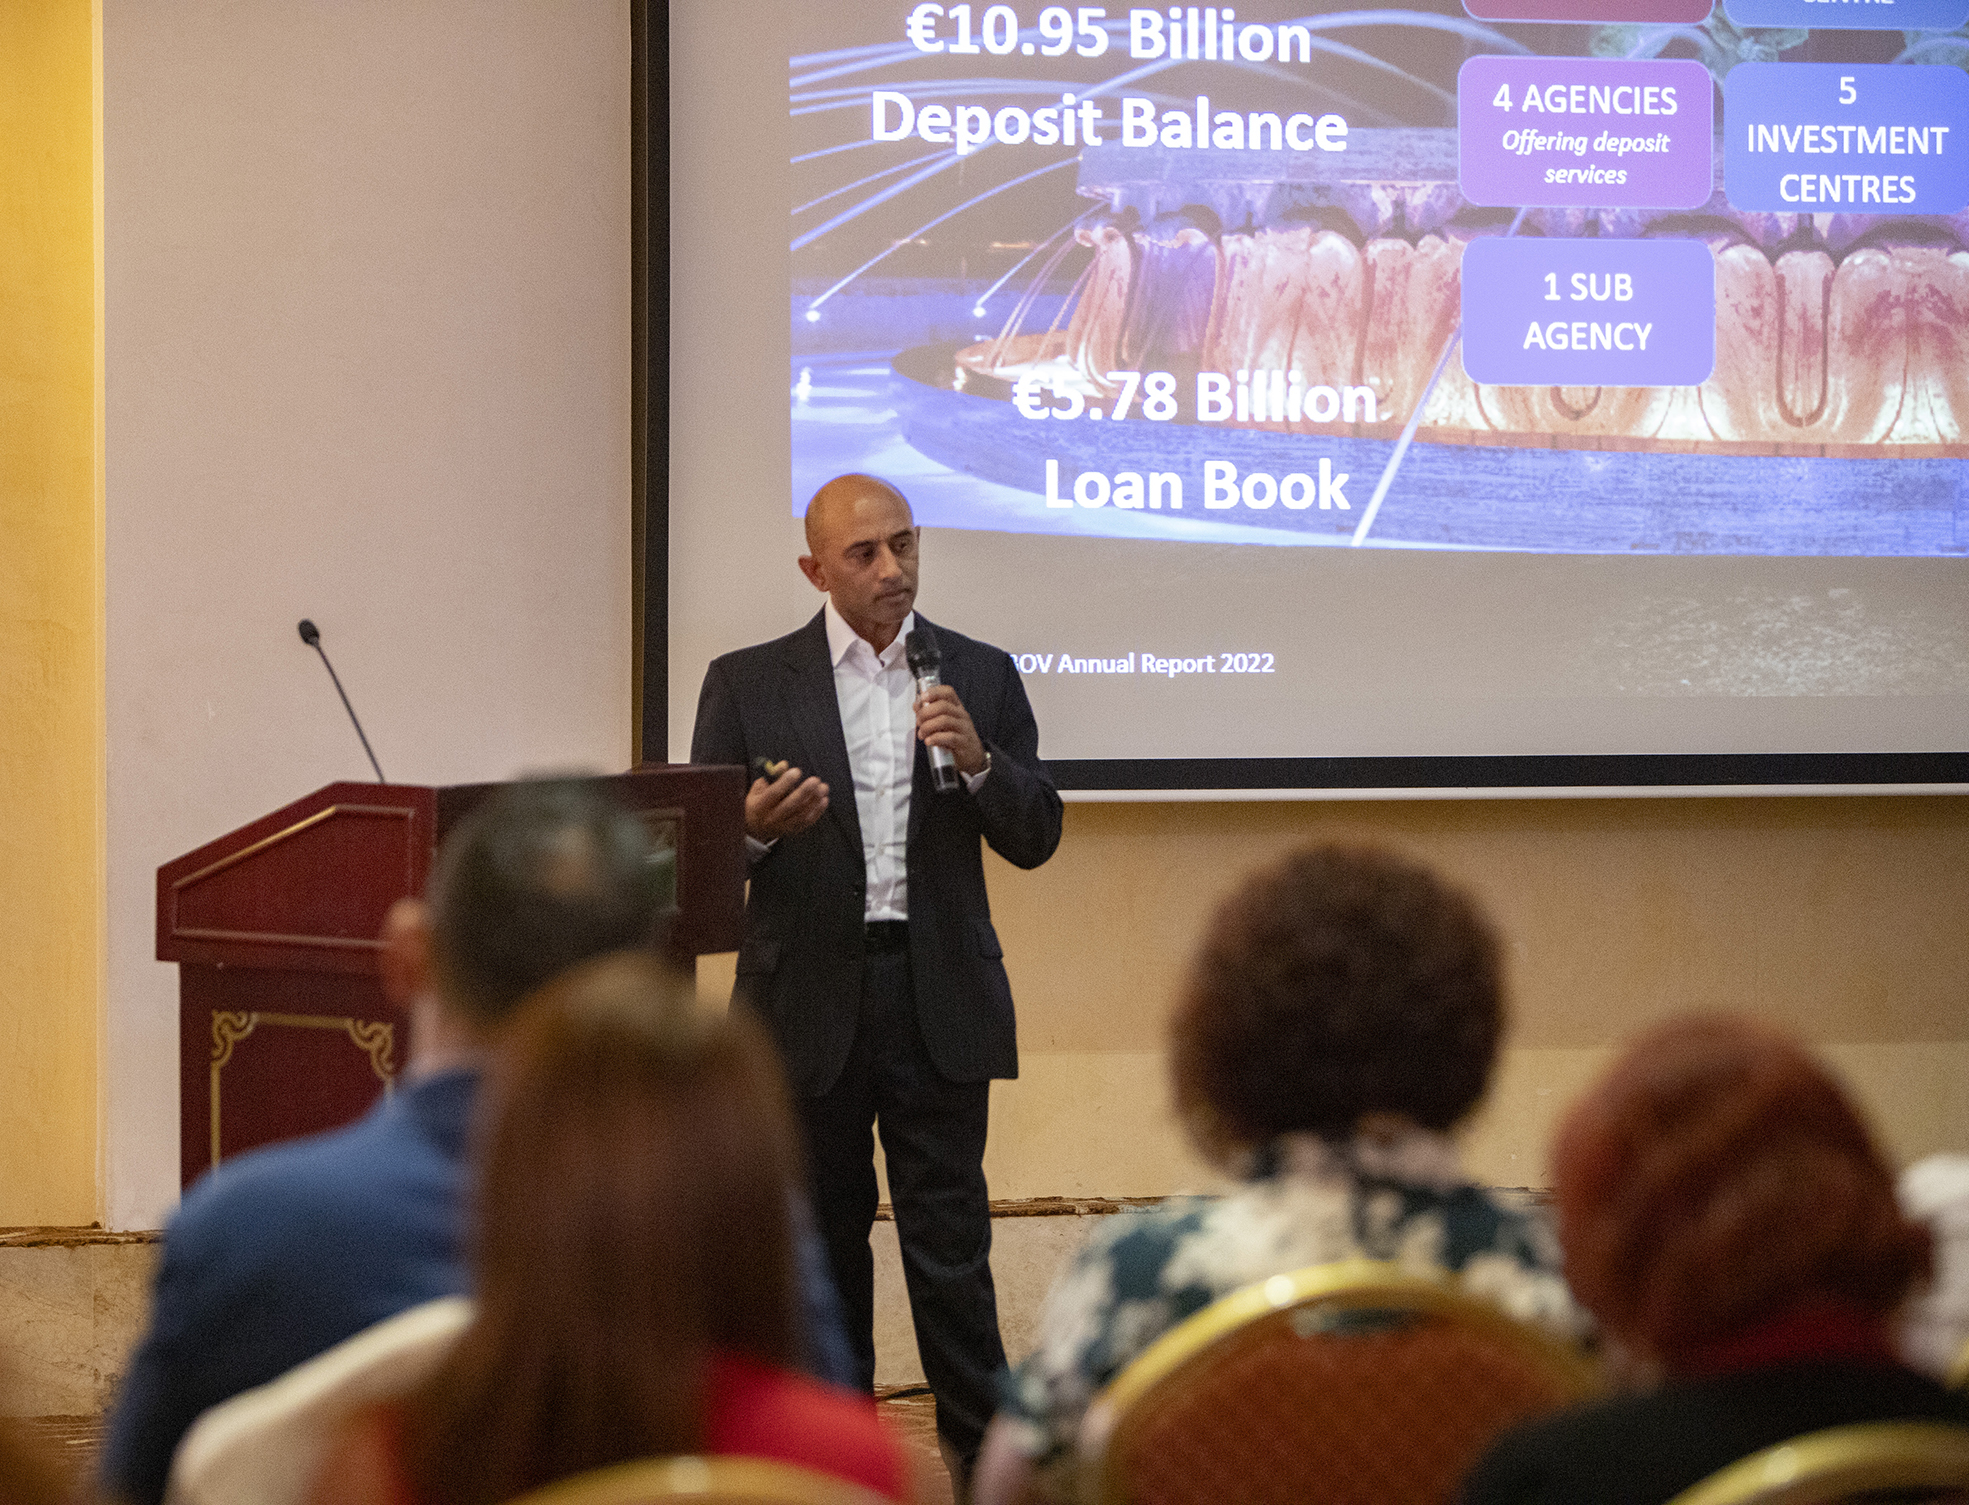 Bank of Valletta Explains Financial Wellbeing to MUMN Healthcare Practitioners